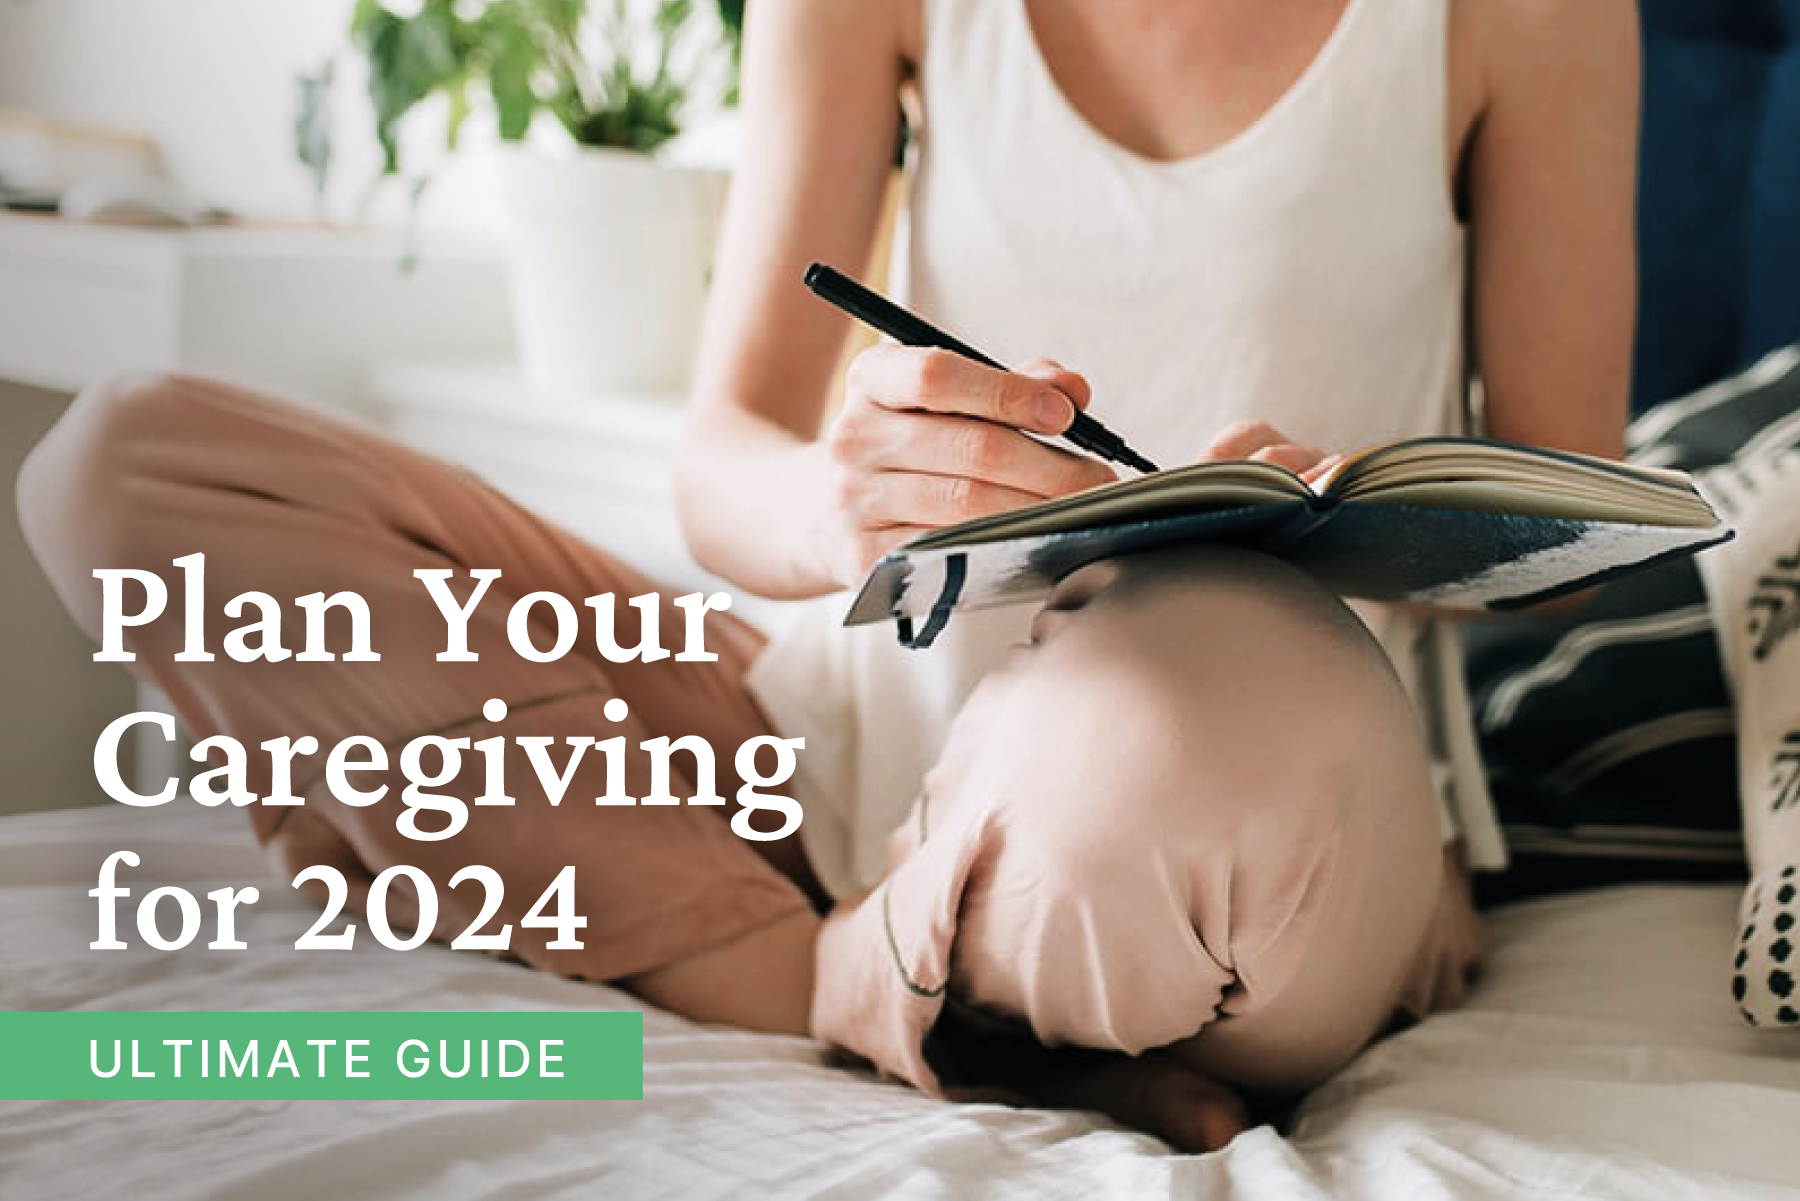 Plan Your Caregiving for 2024